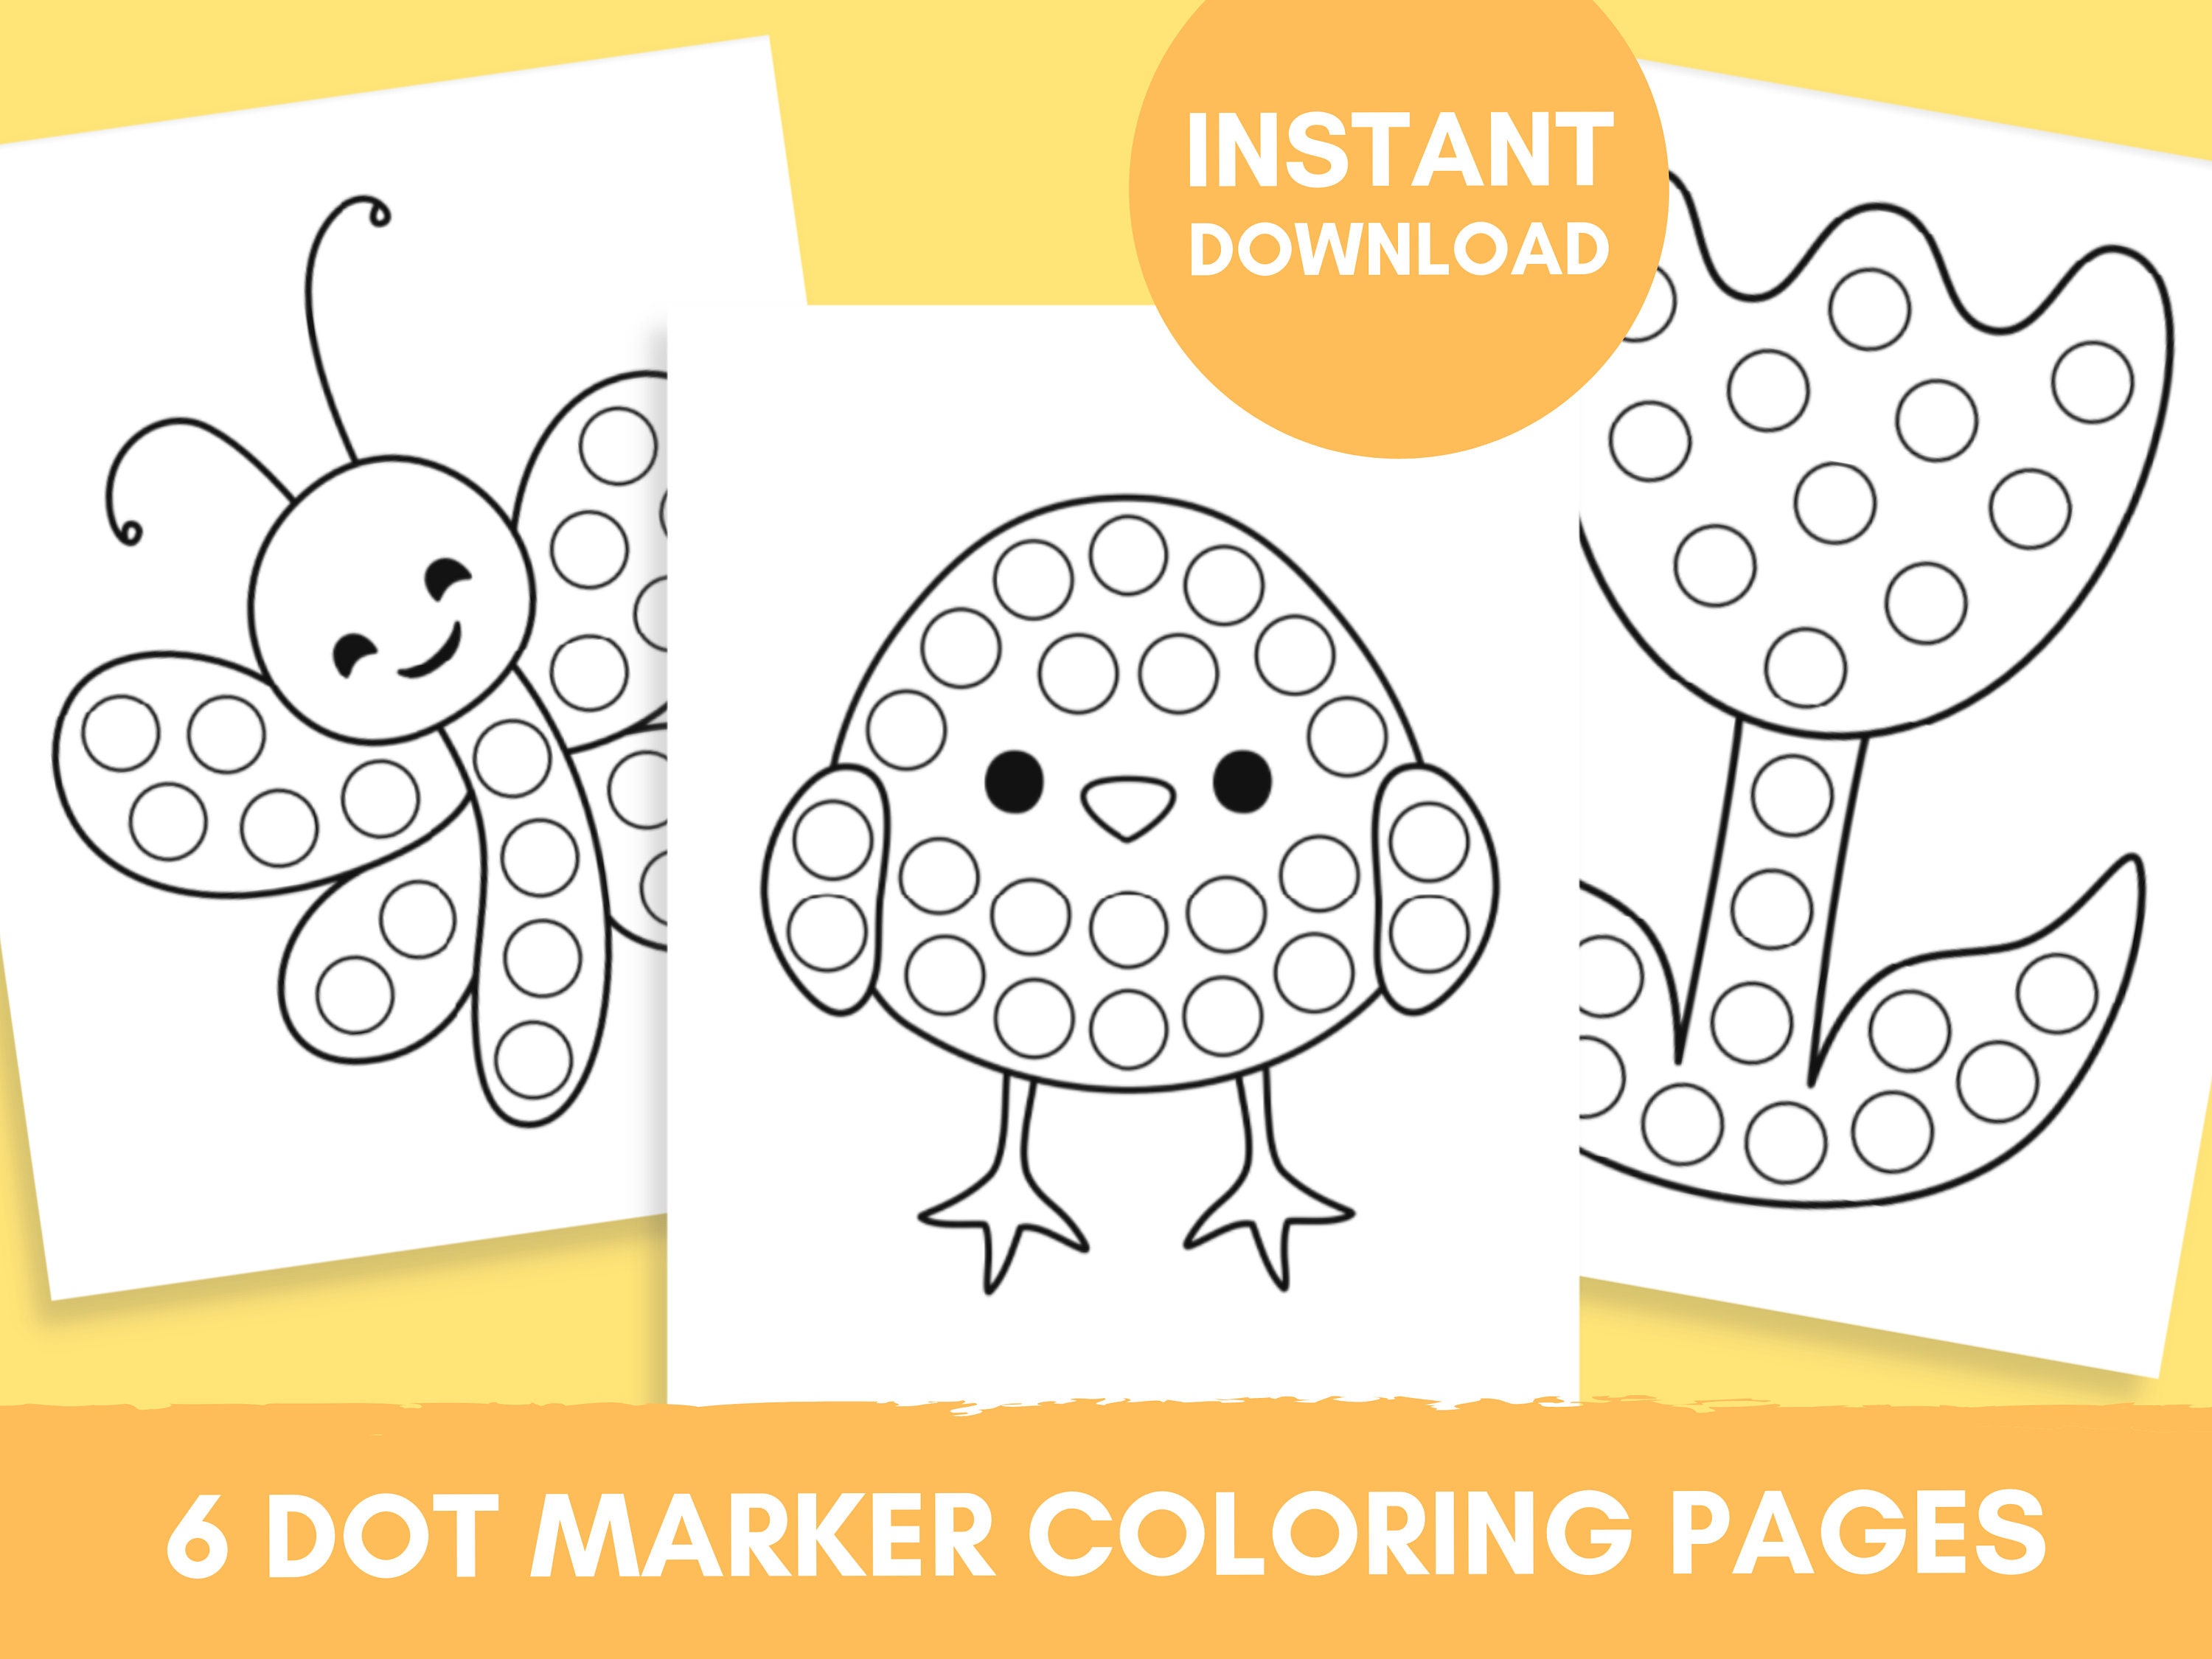 Printable spring dot marker coloring pages for kids dot marker activity pages dot marker printable cute animal designs download now